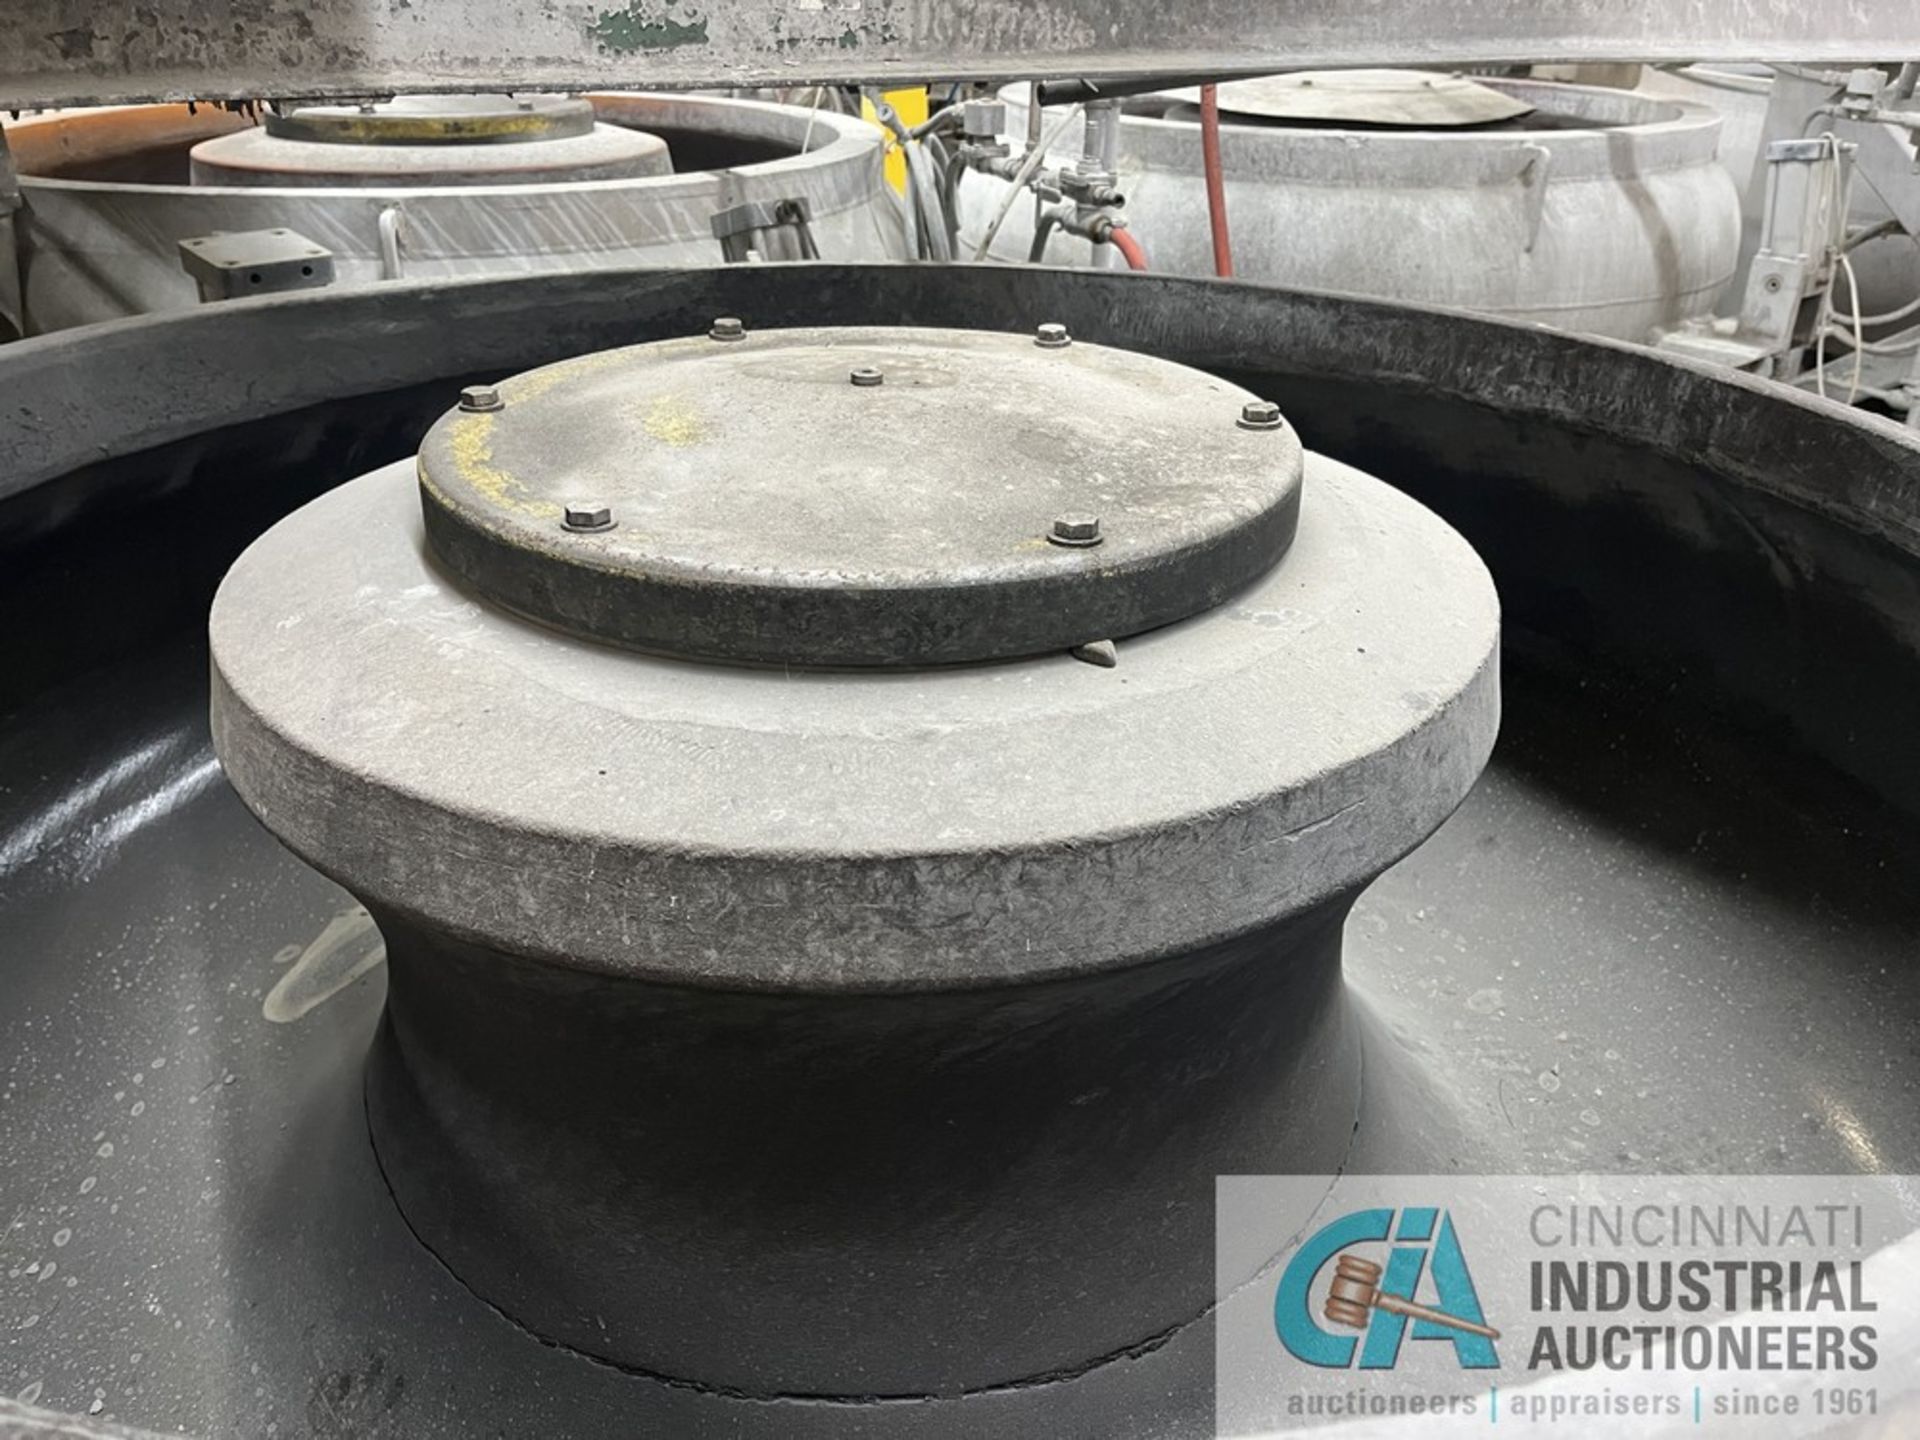 56" DIAMETER / 23 CUBIC FOOT ALMCO VIBRATORY BOWL FINISHING BOWL **SUBJECT TO OVERALL BID** - Image 4 of 8